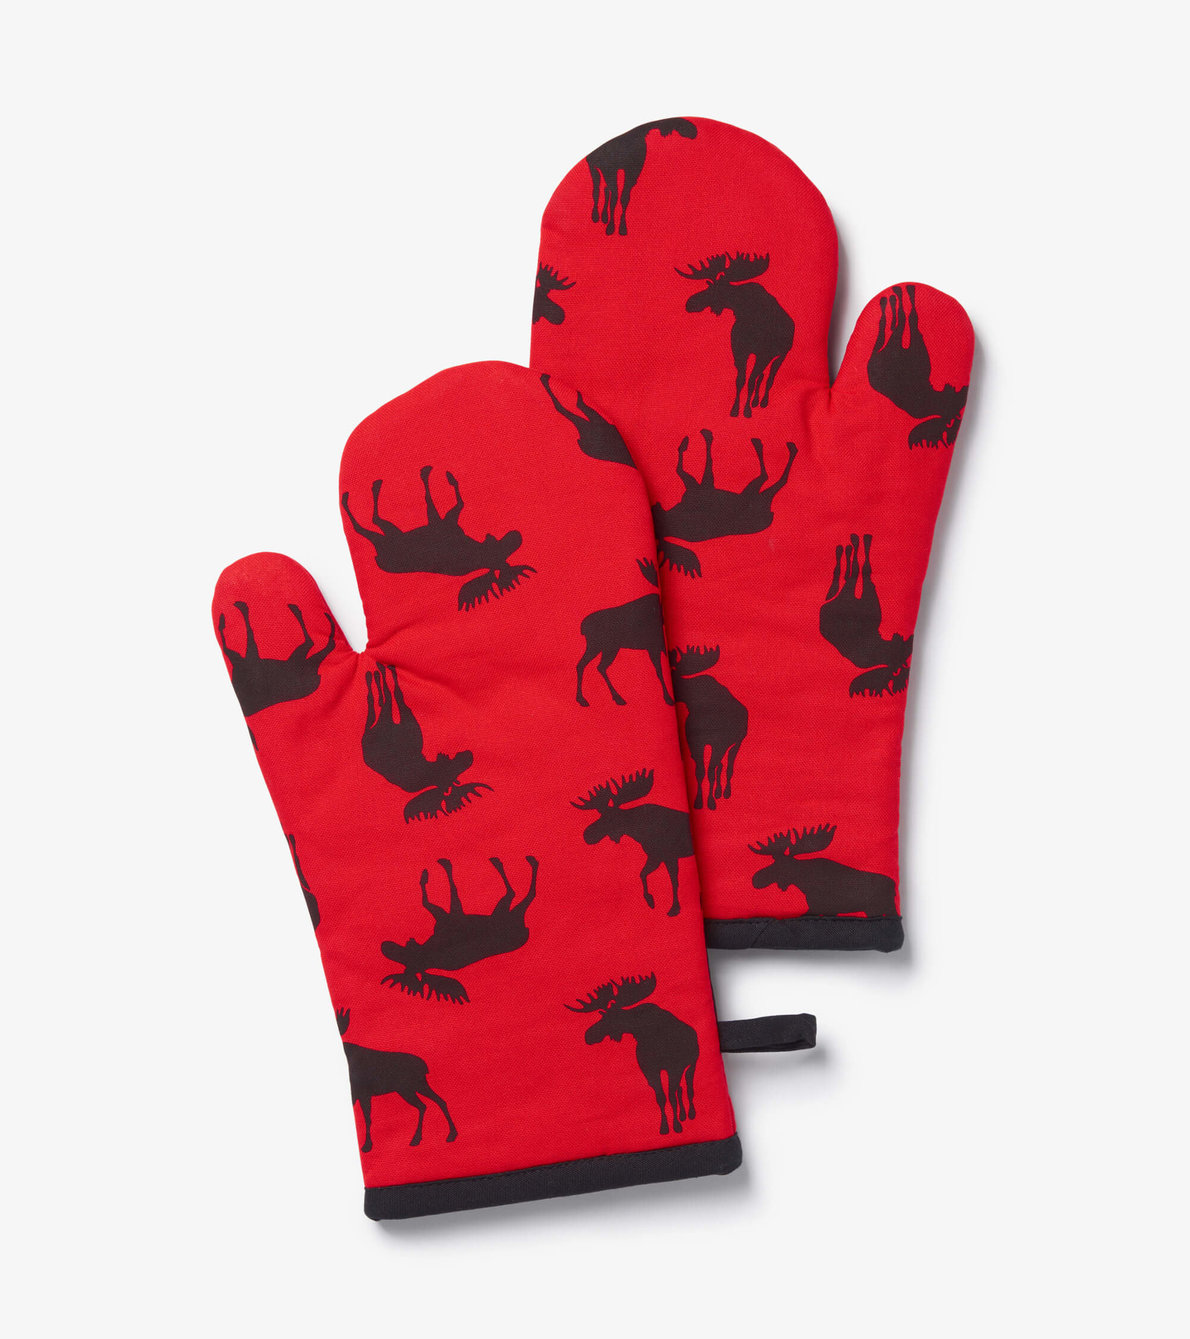 View larger image of Moose on Red Oven Mitts